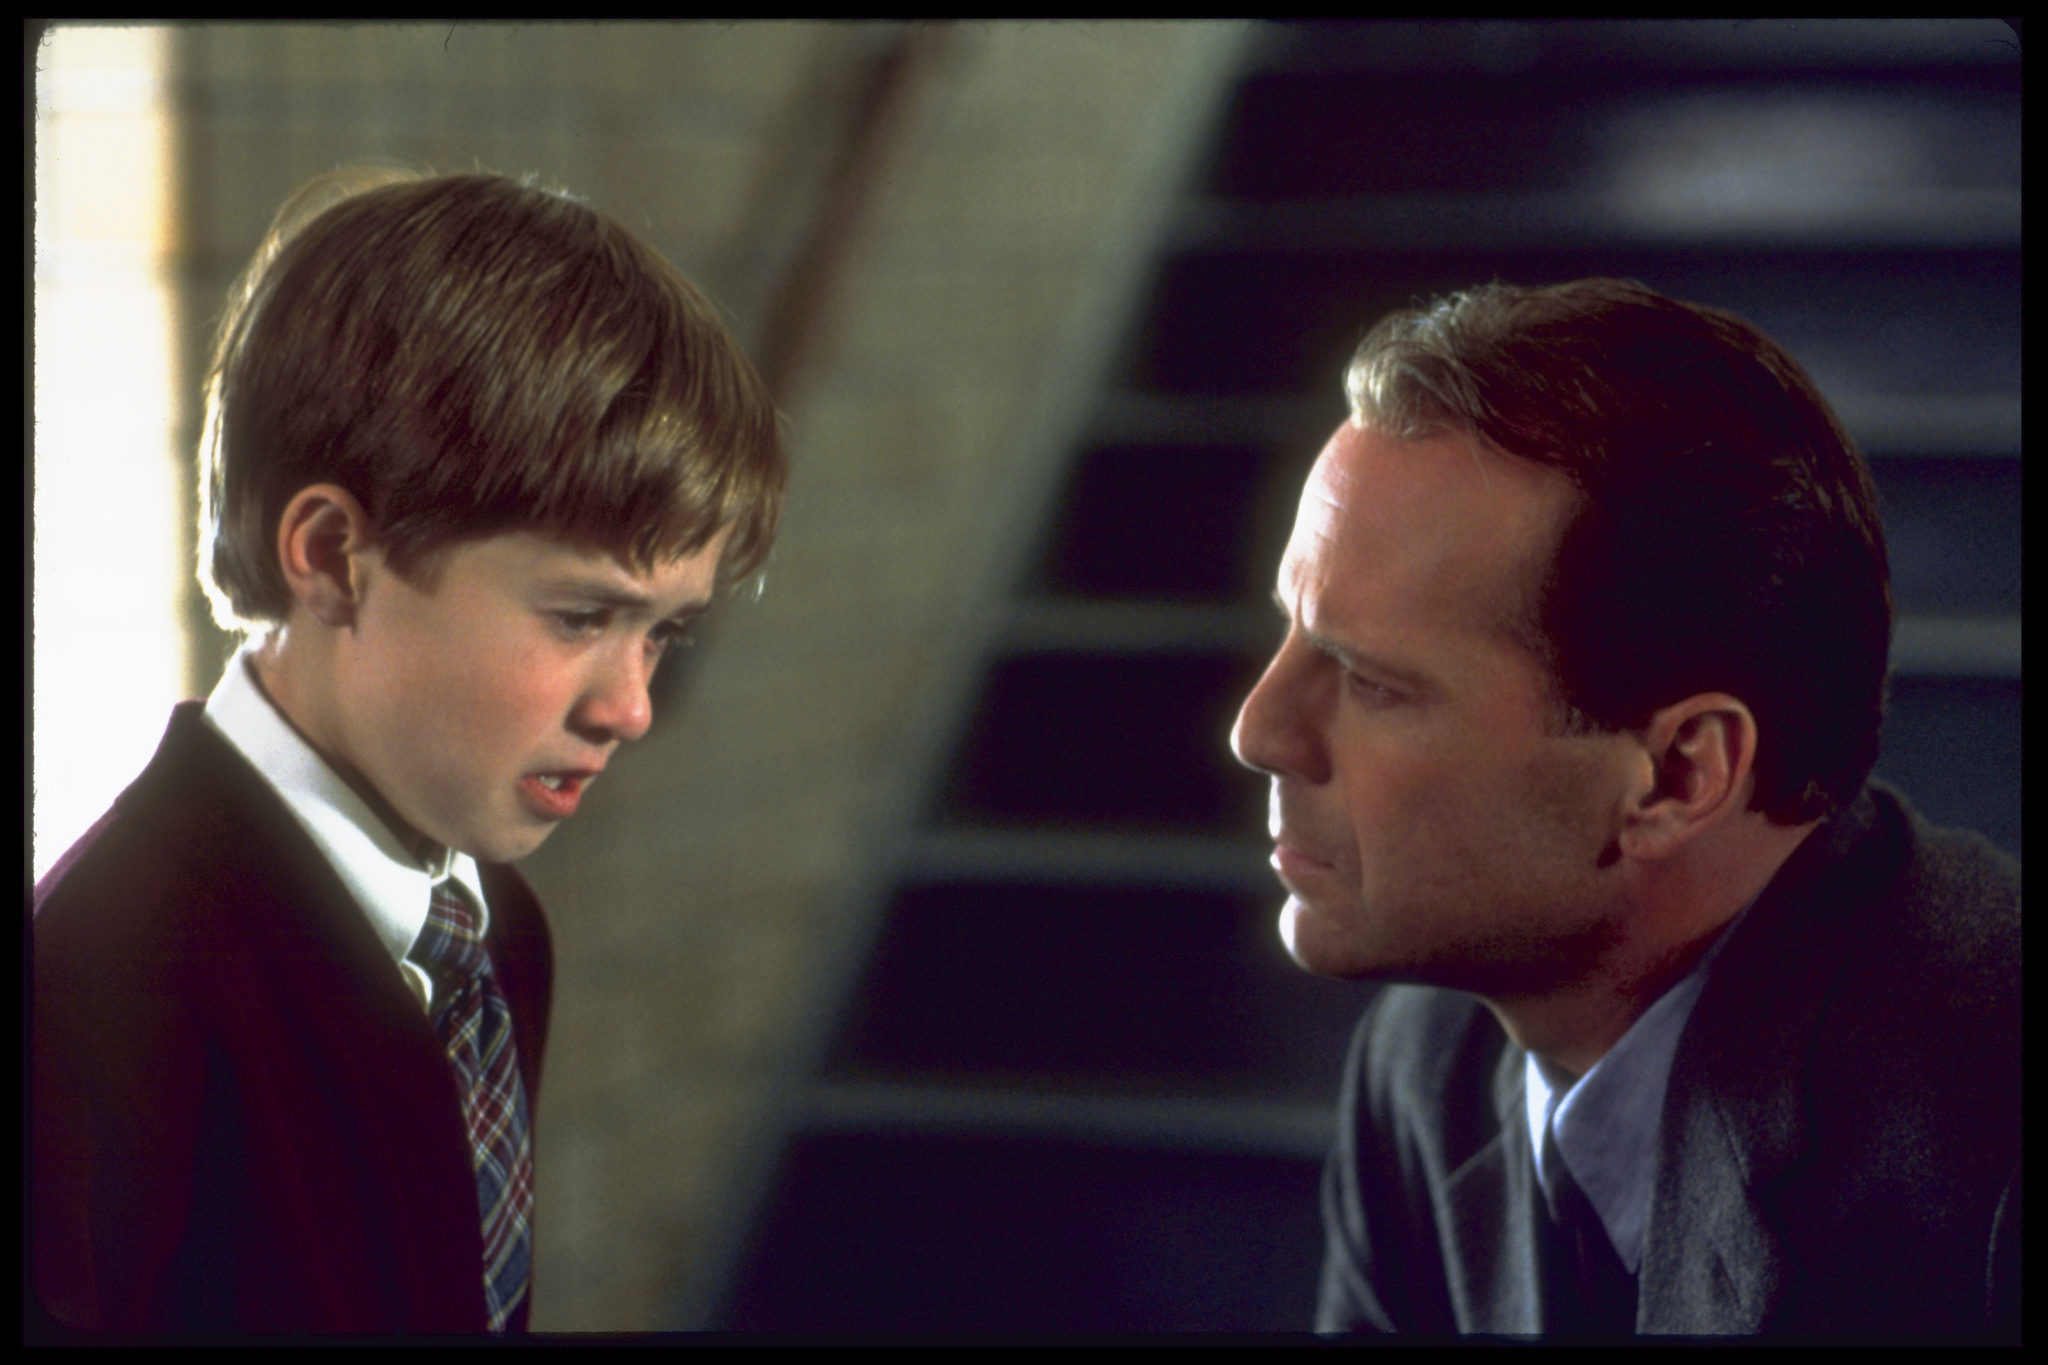 Bruce Willis as Dr. Crowe in The Sixth Sense